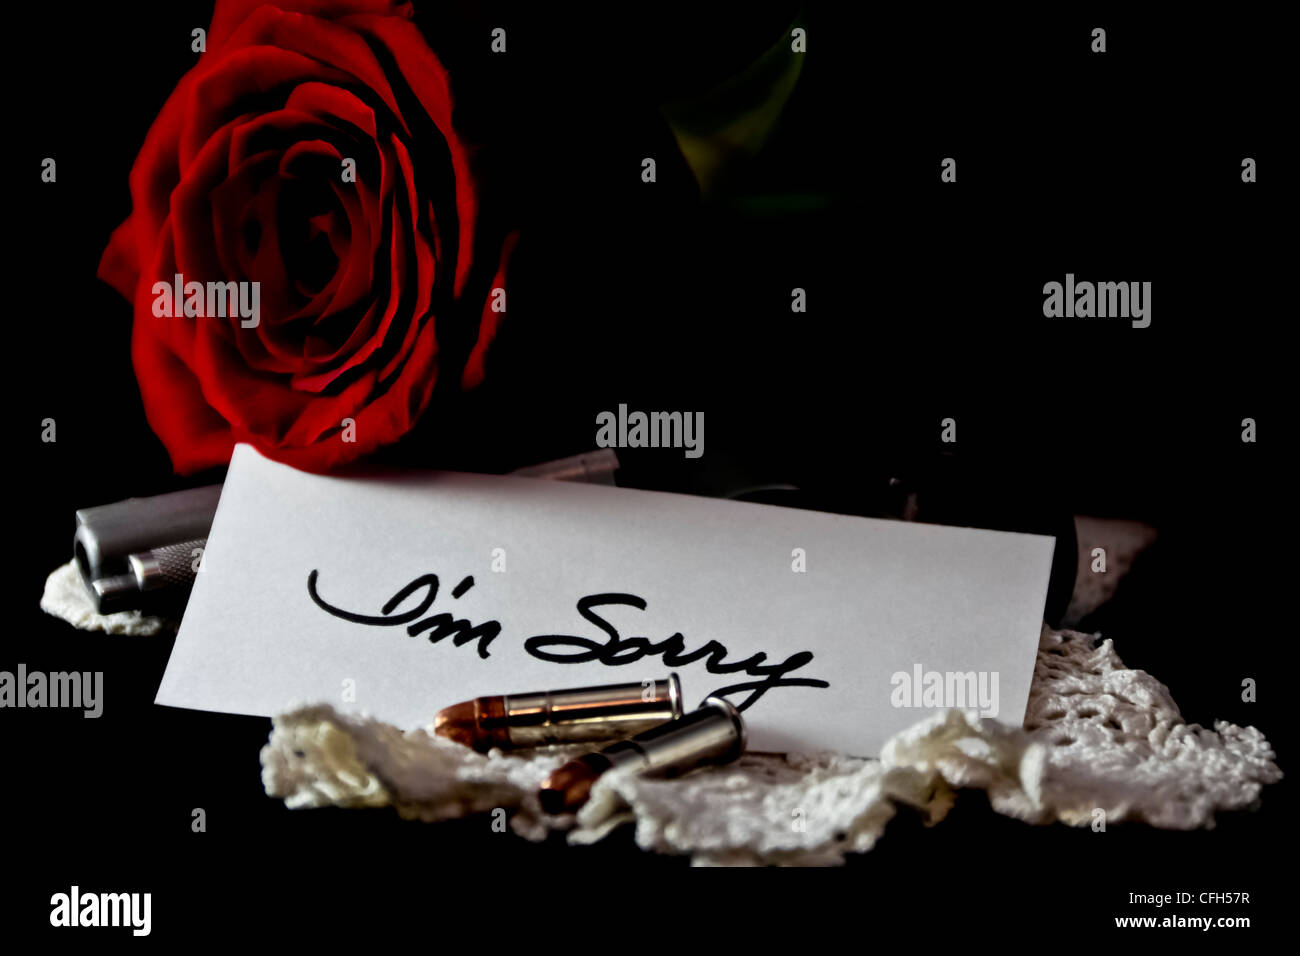 Red rose on black velvet with handgun and sorry note Stock Photo